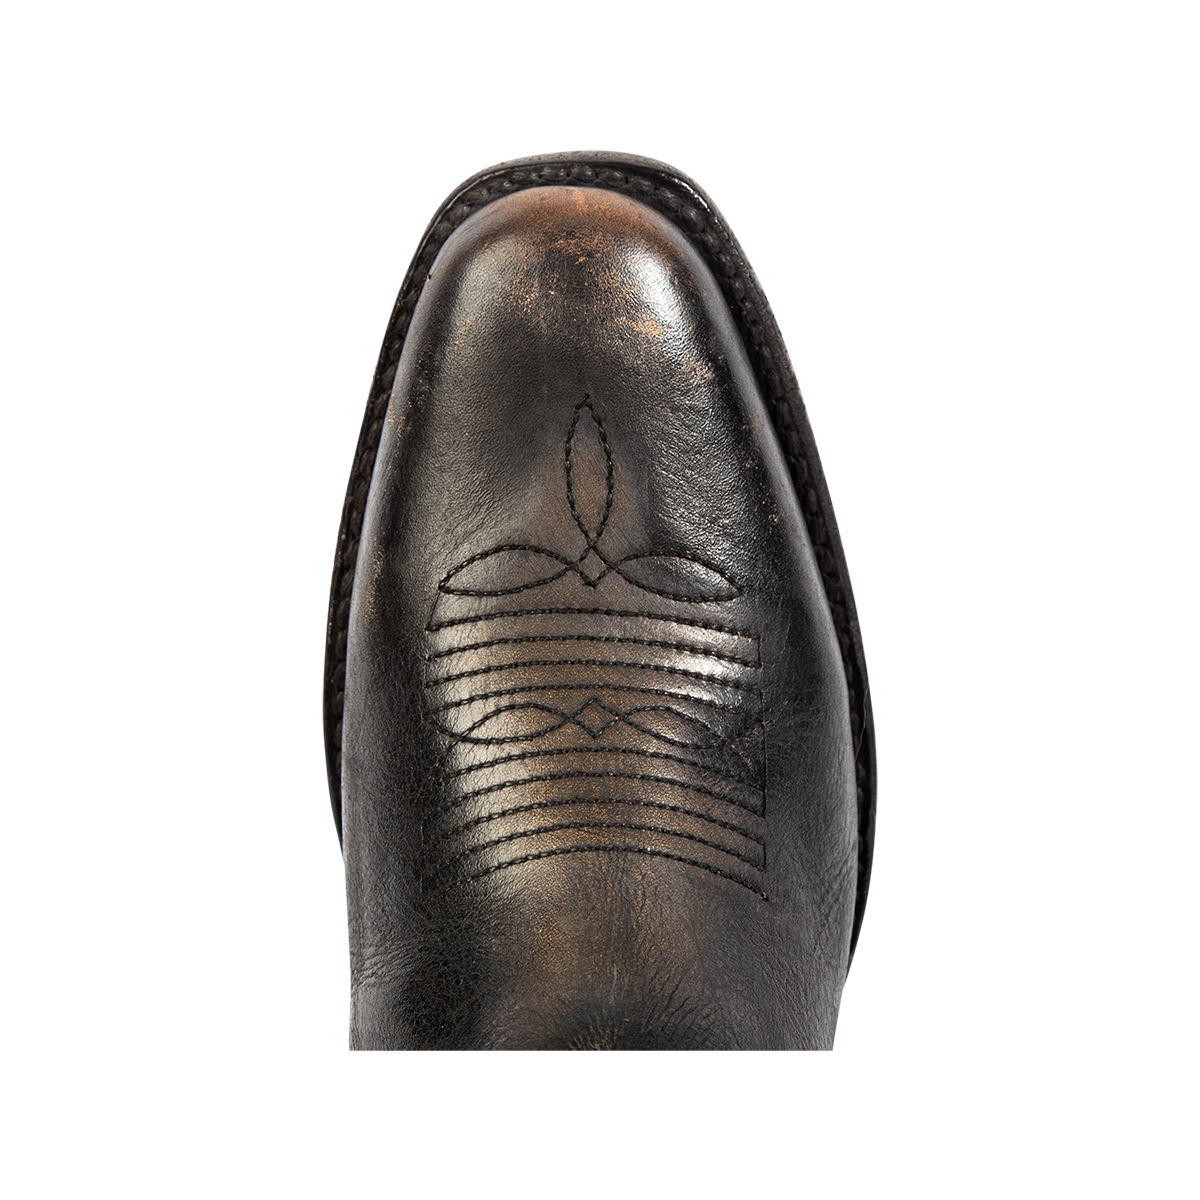 Top view showing a square toe and stitch detailing on FREEBIRD women's Montana black leather boot